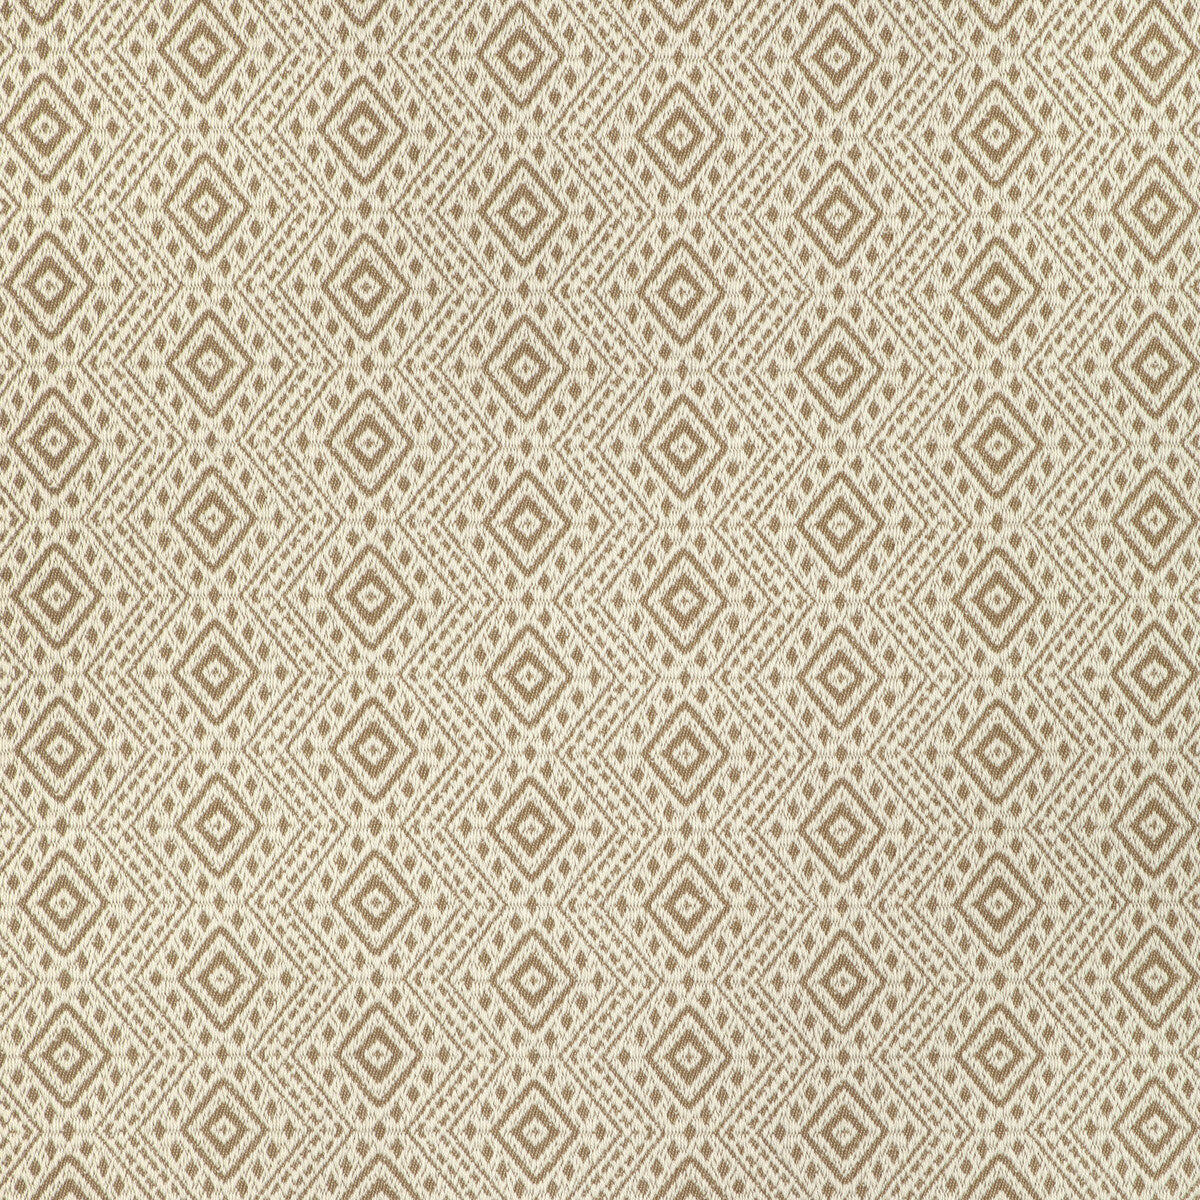 Kravet Design fabric in 37237-16 color - pattern 37237.16.0 - by Kravet Design in the Woven Colors collection